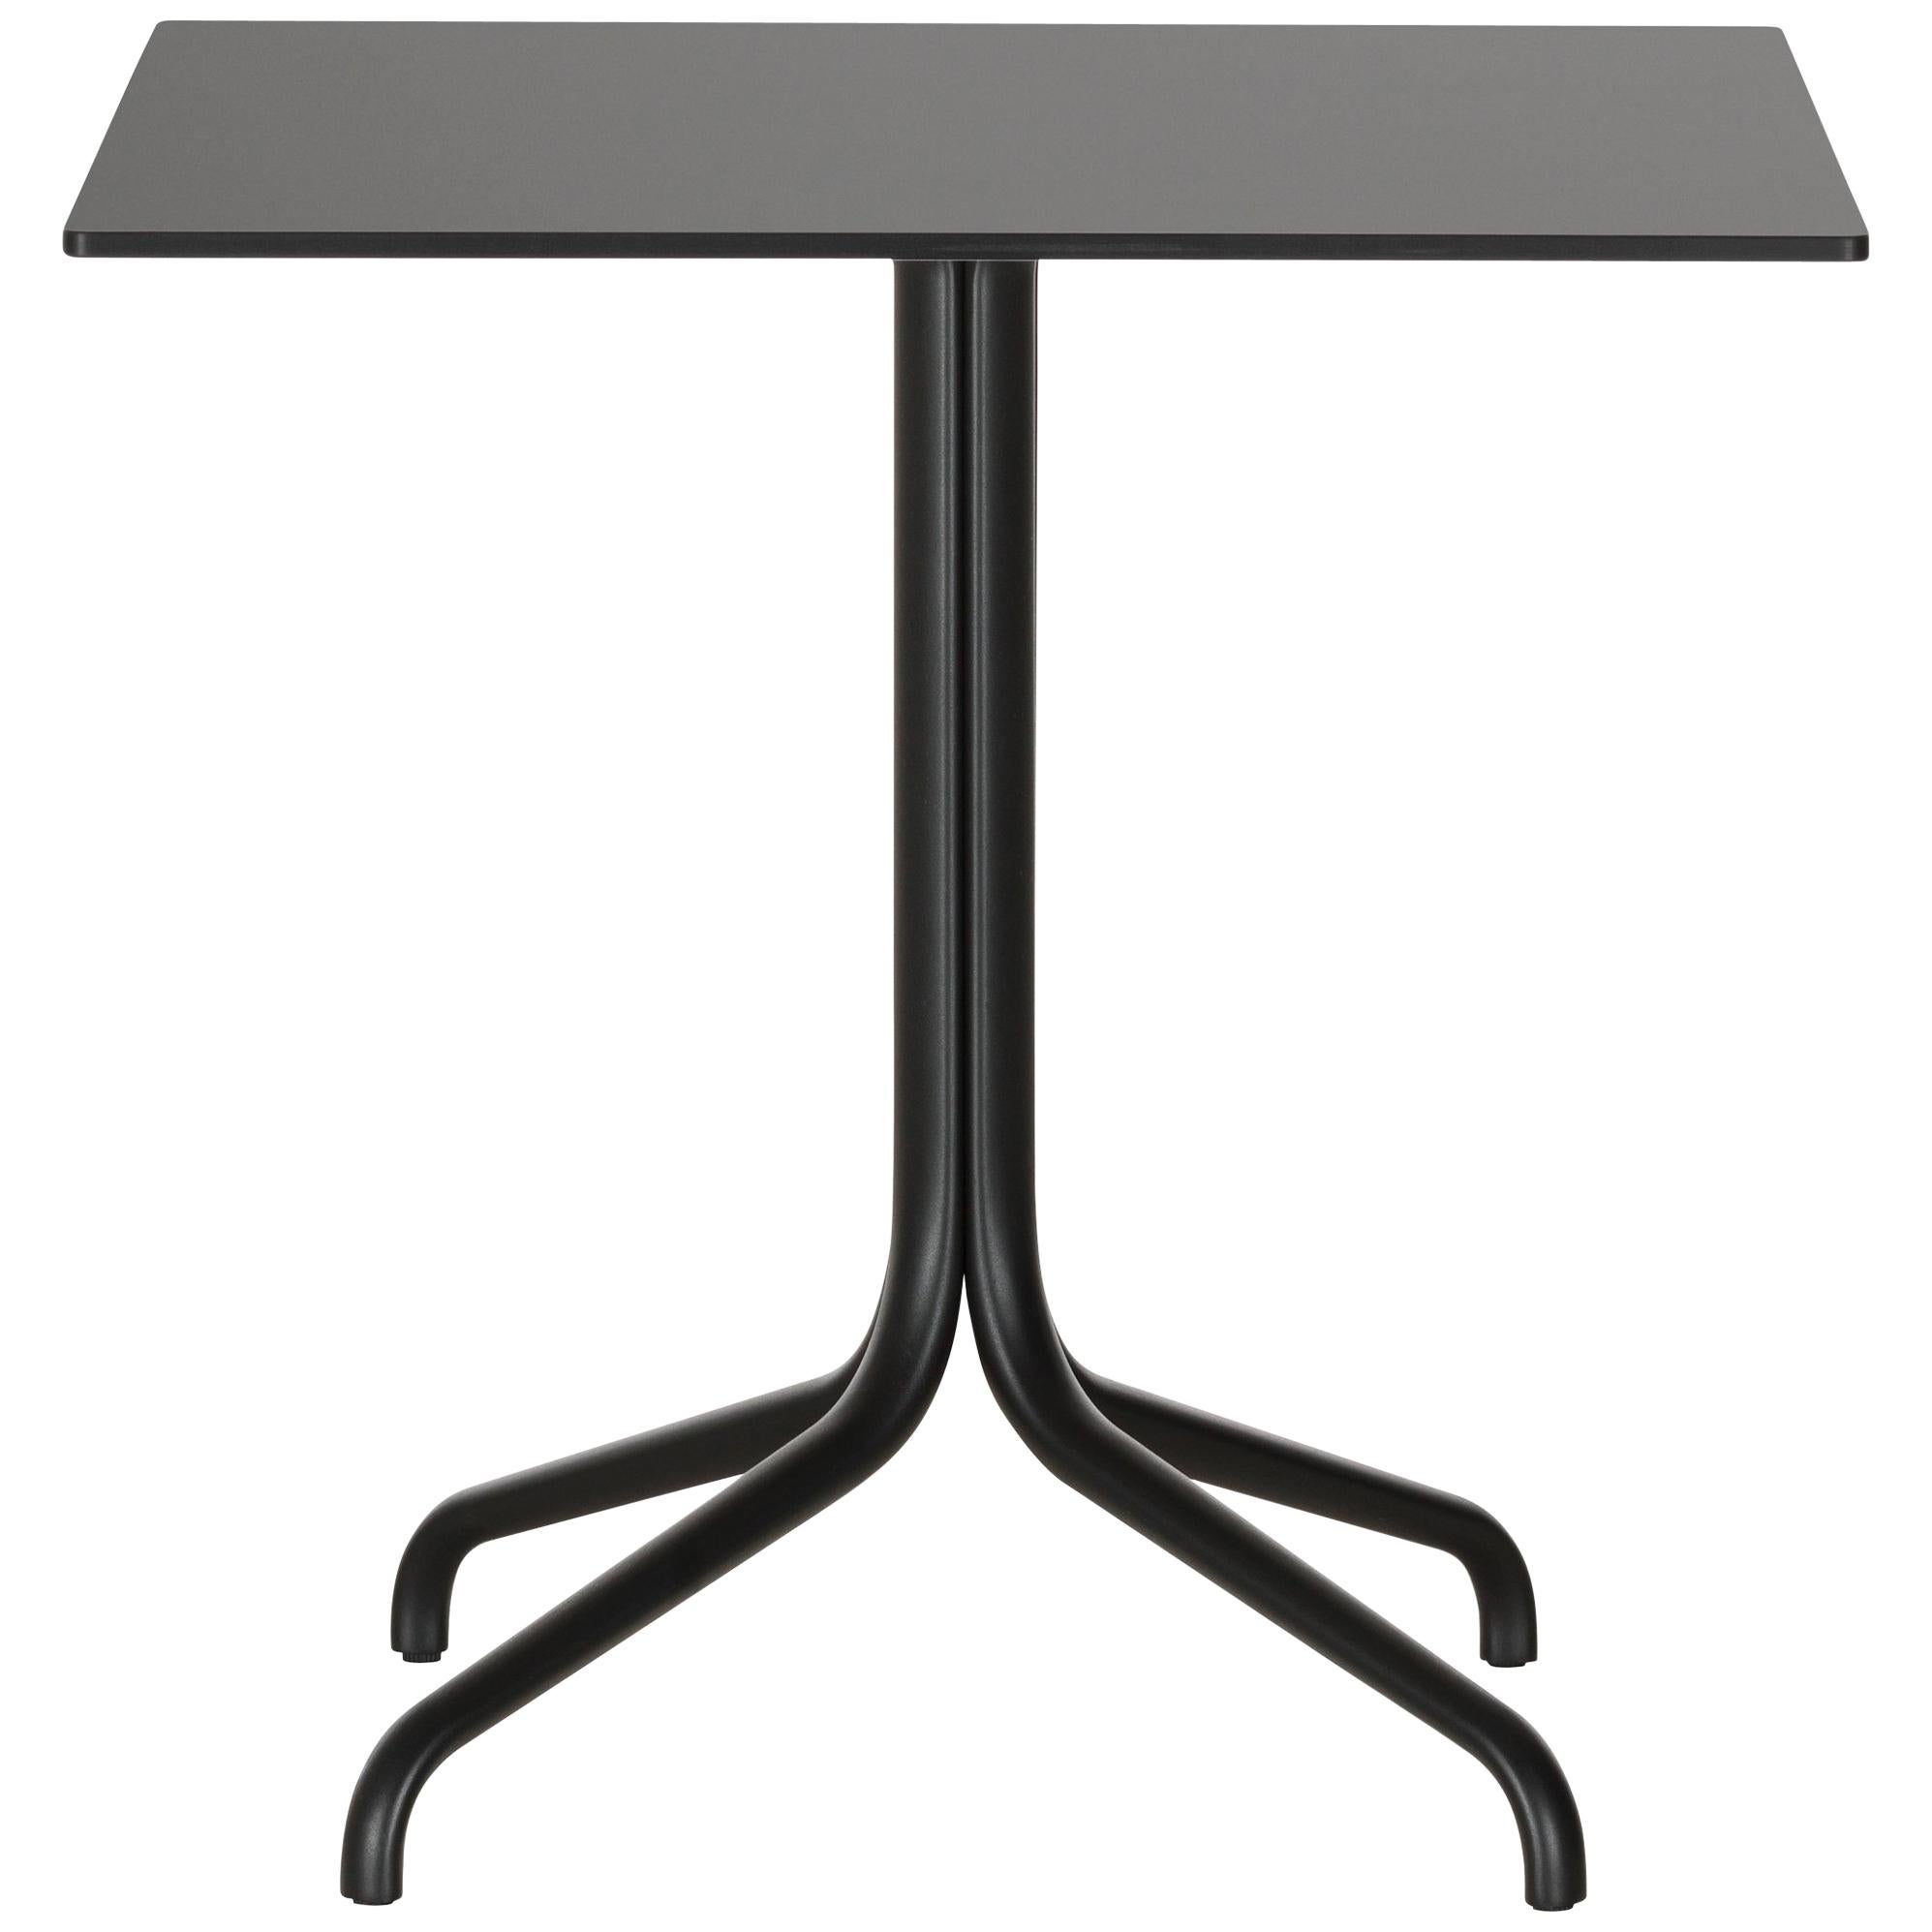 Vitra Belleville Square Table Outdoor in Black by Ronan & Erwan Bouroullec For Sale